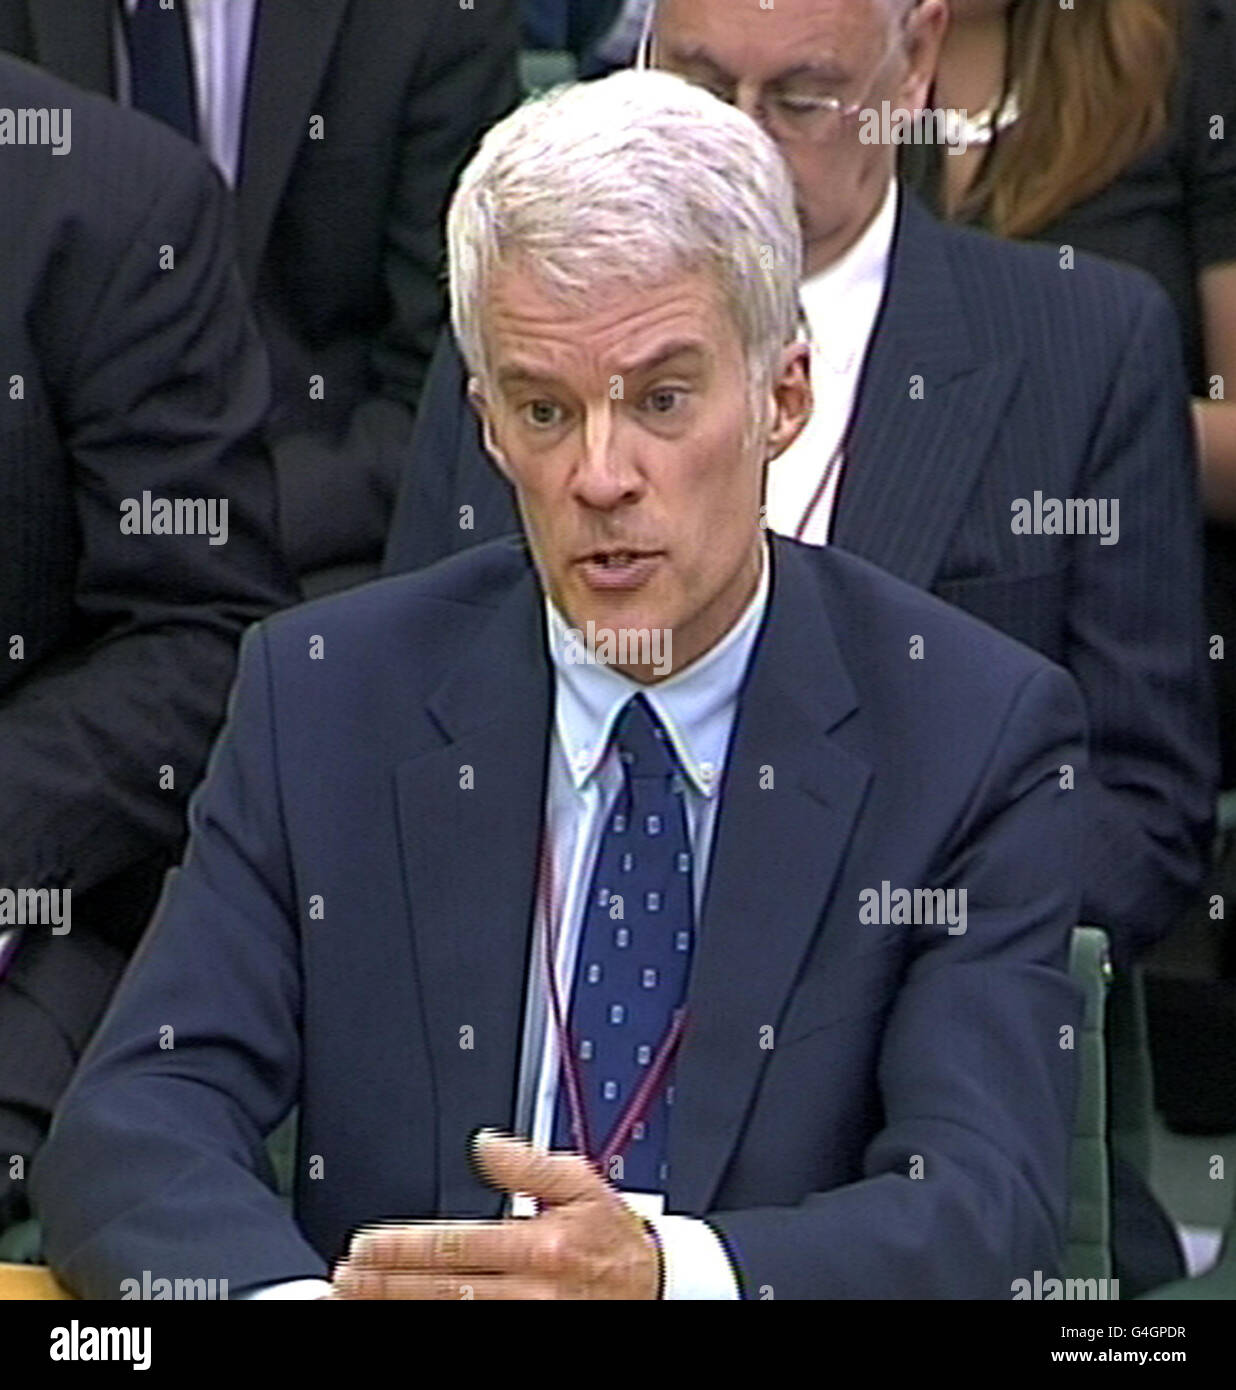 News International's former director of legal affairs Jonathan Chapman appears before the Commons Culture, Media and Sport committee, as the probe into the phone-hacking scandal is resumed following the summer recess. Stock Photo